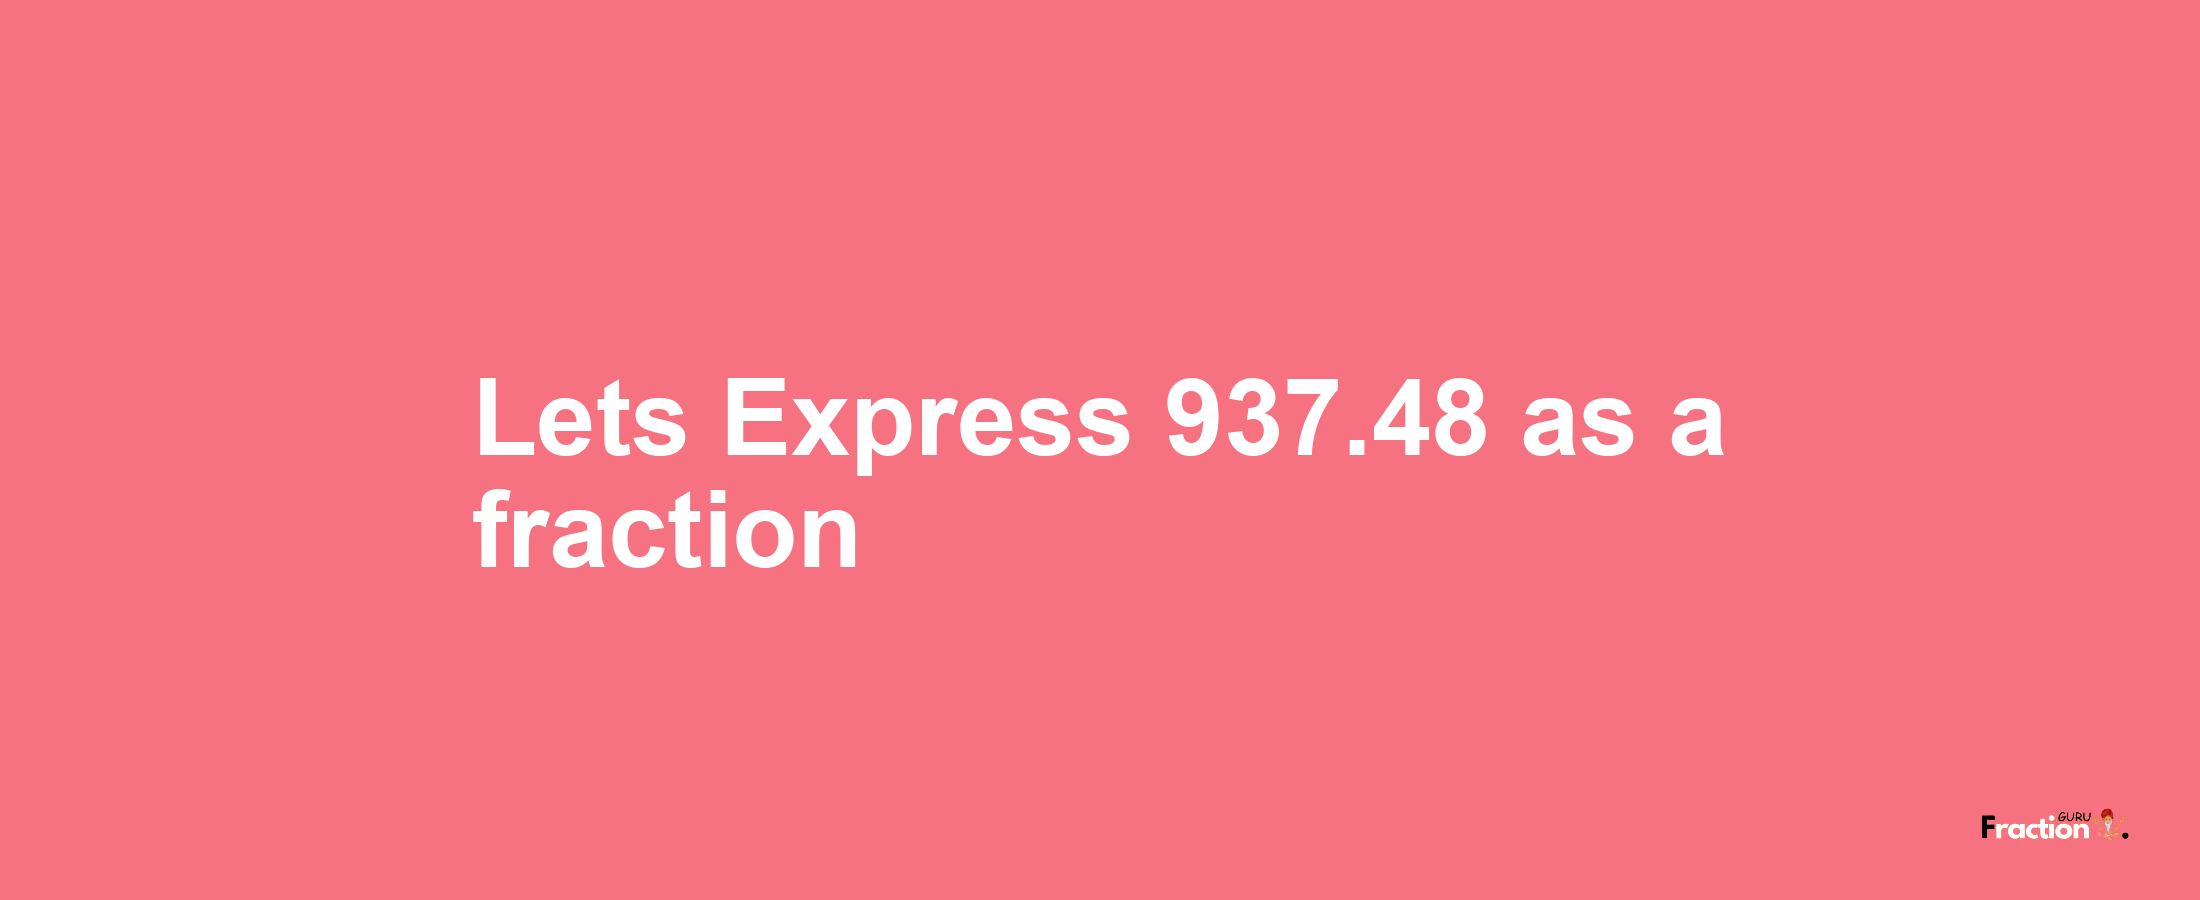 Lets Express 937.48 as afraction